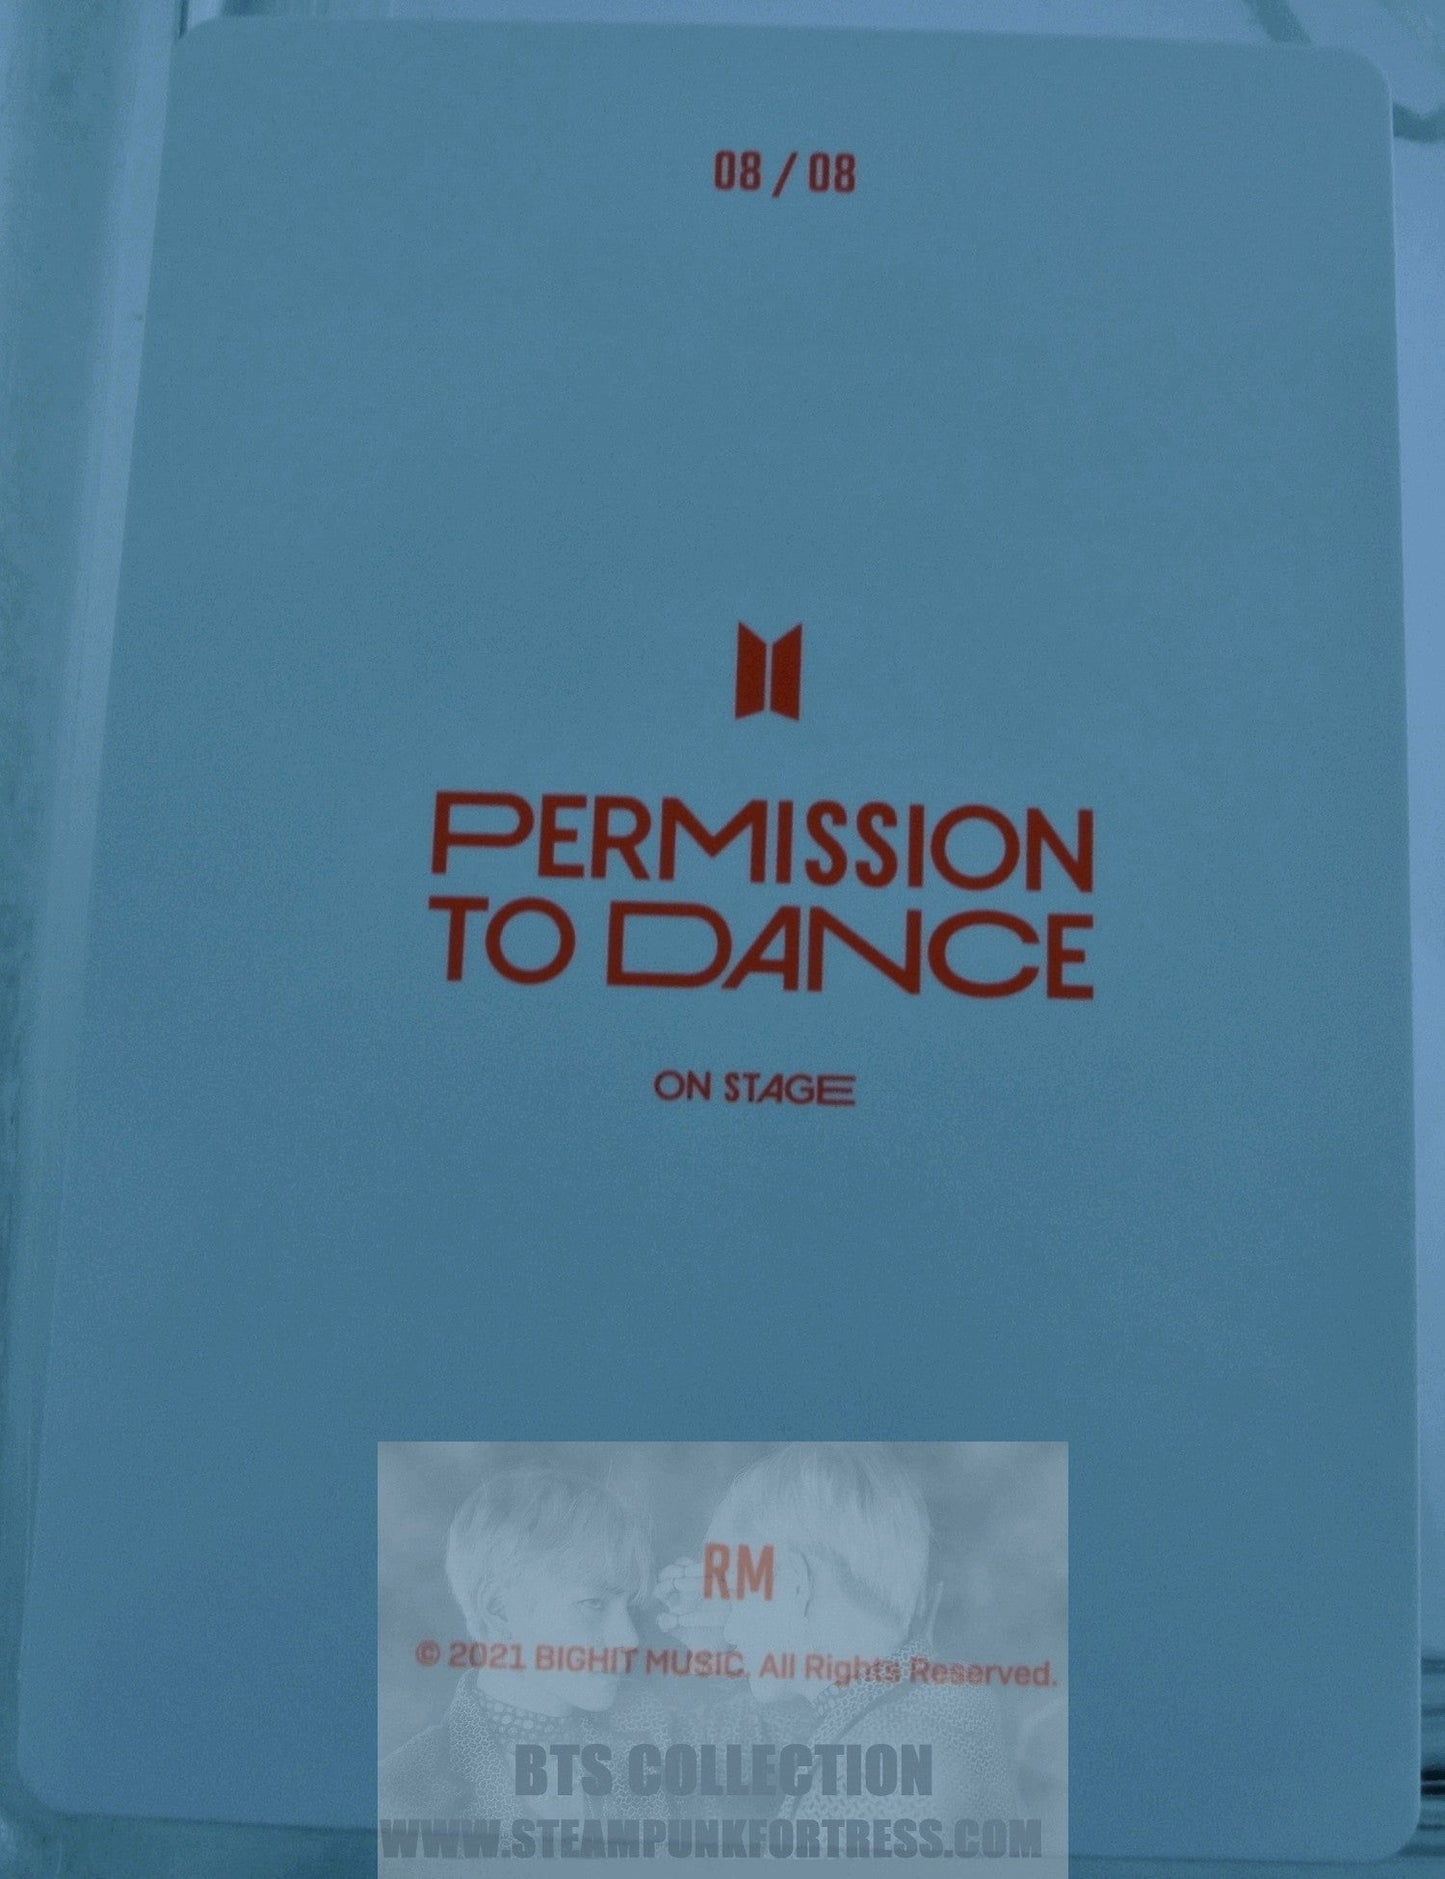 BTS RM KIM NAMJOON NAM-JOON 2021 PERMISSION TO DANCE ON STAGE PTD #8 OF 8 PHOTOCARD PHOTO CARD NEW OFFICIAL MERCHANDISE